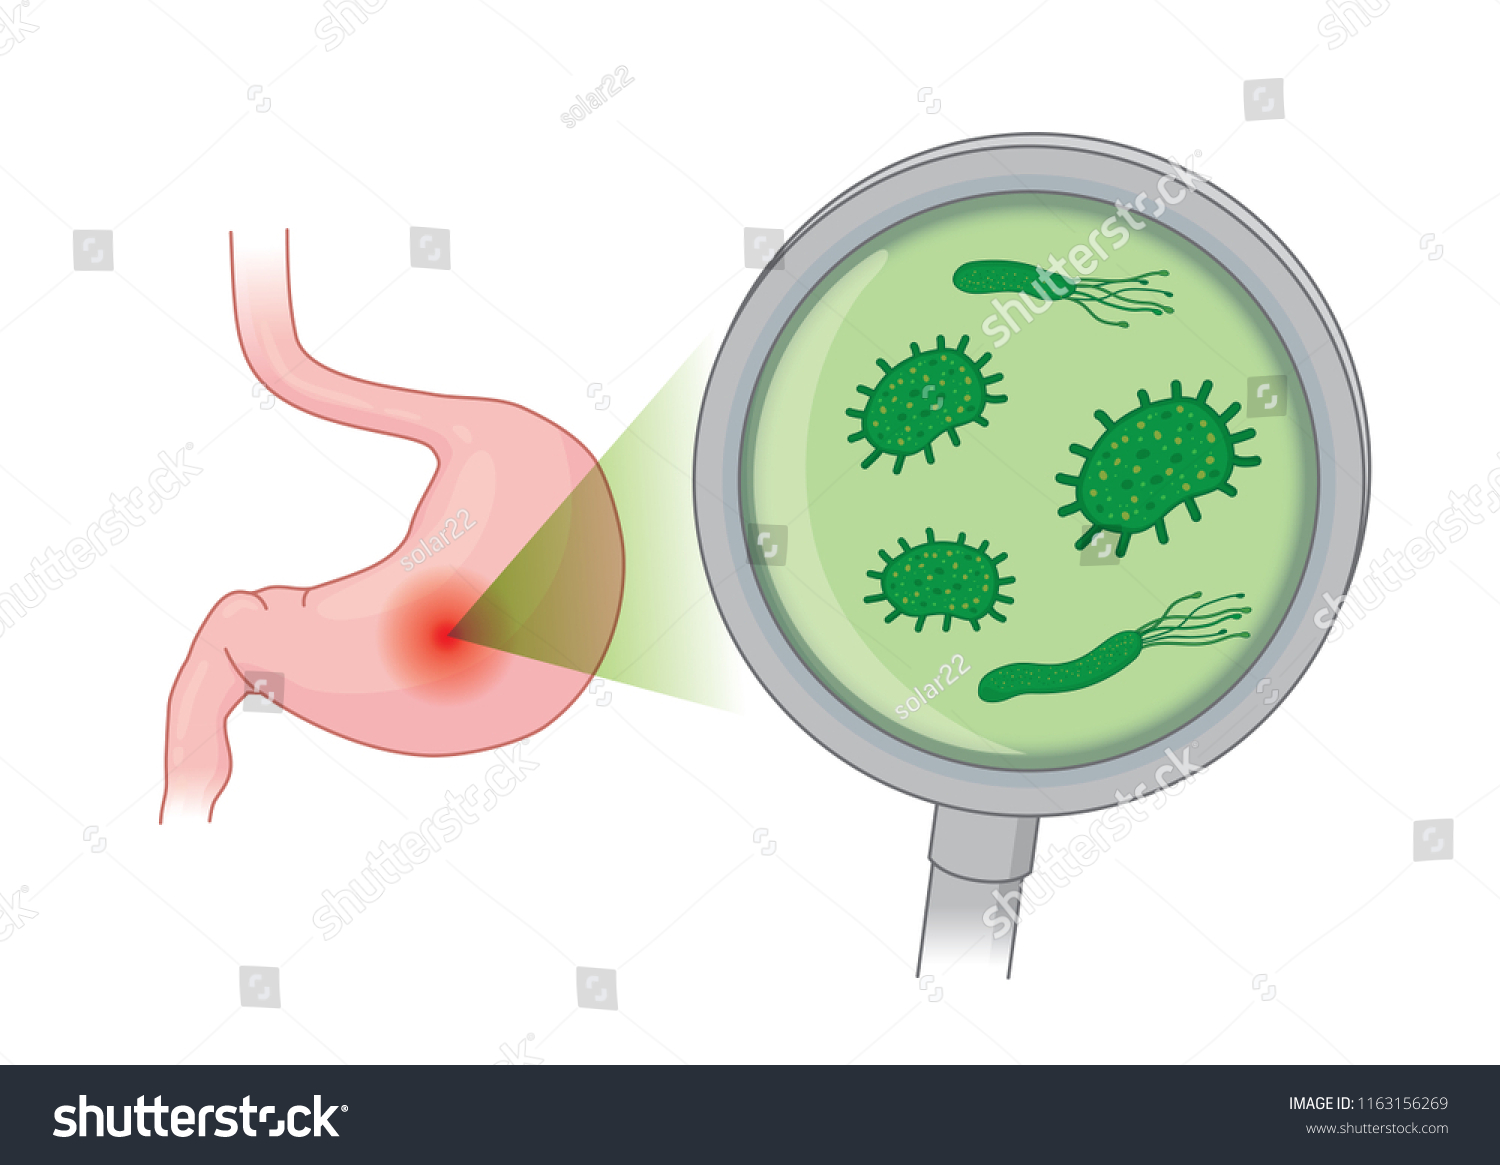 Looking Bacterial Human Stomach Magnifying Glass Stock Vector Royalty